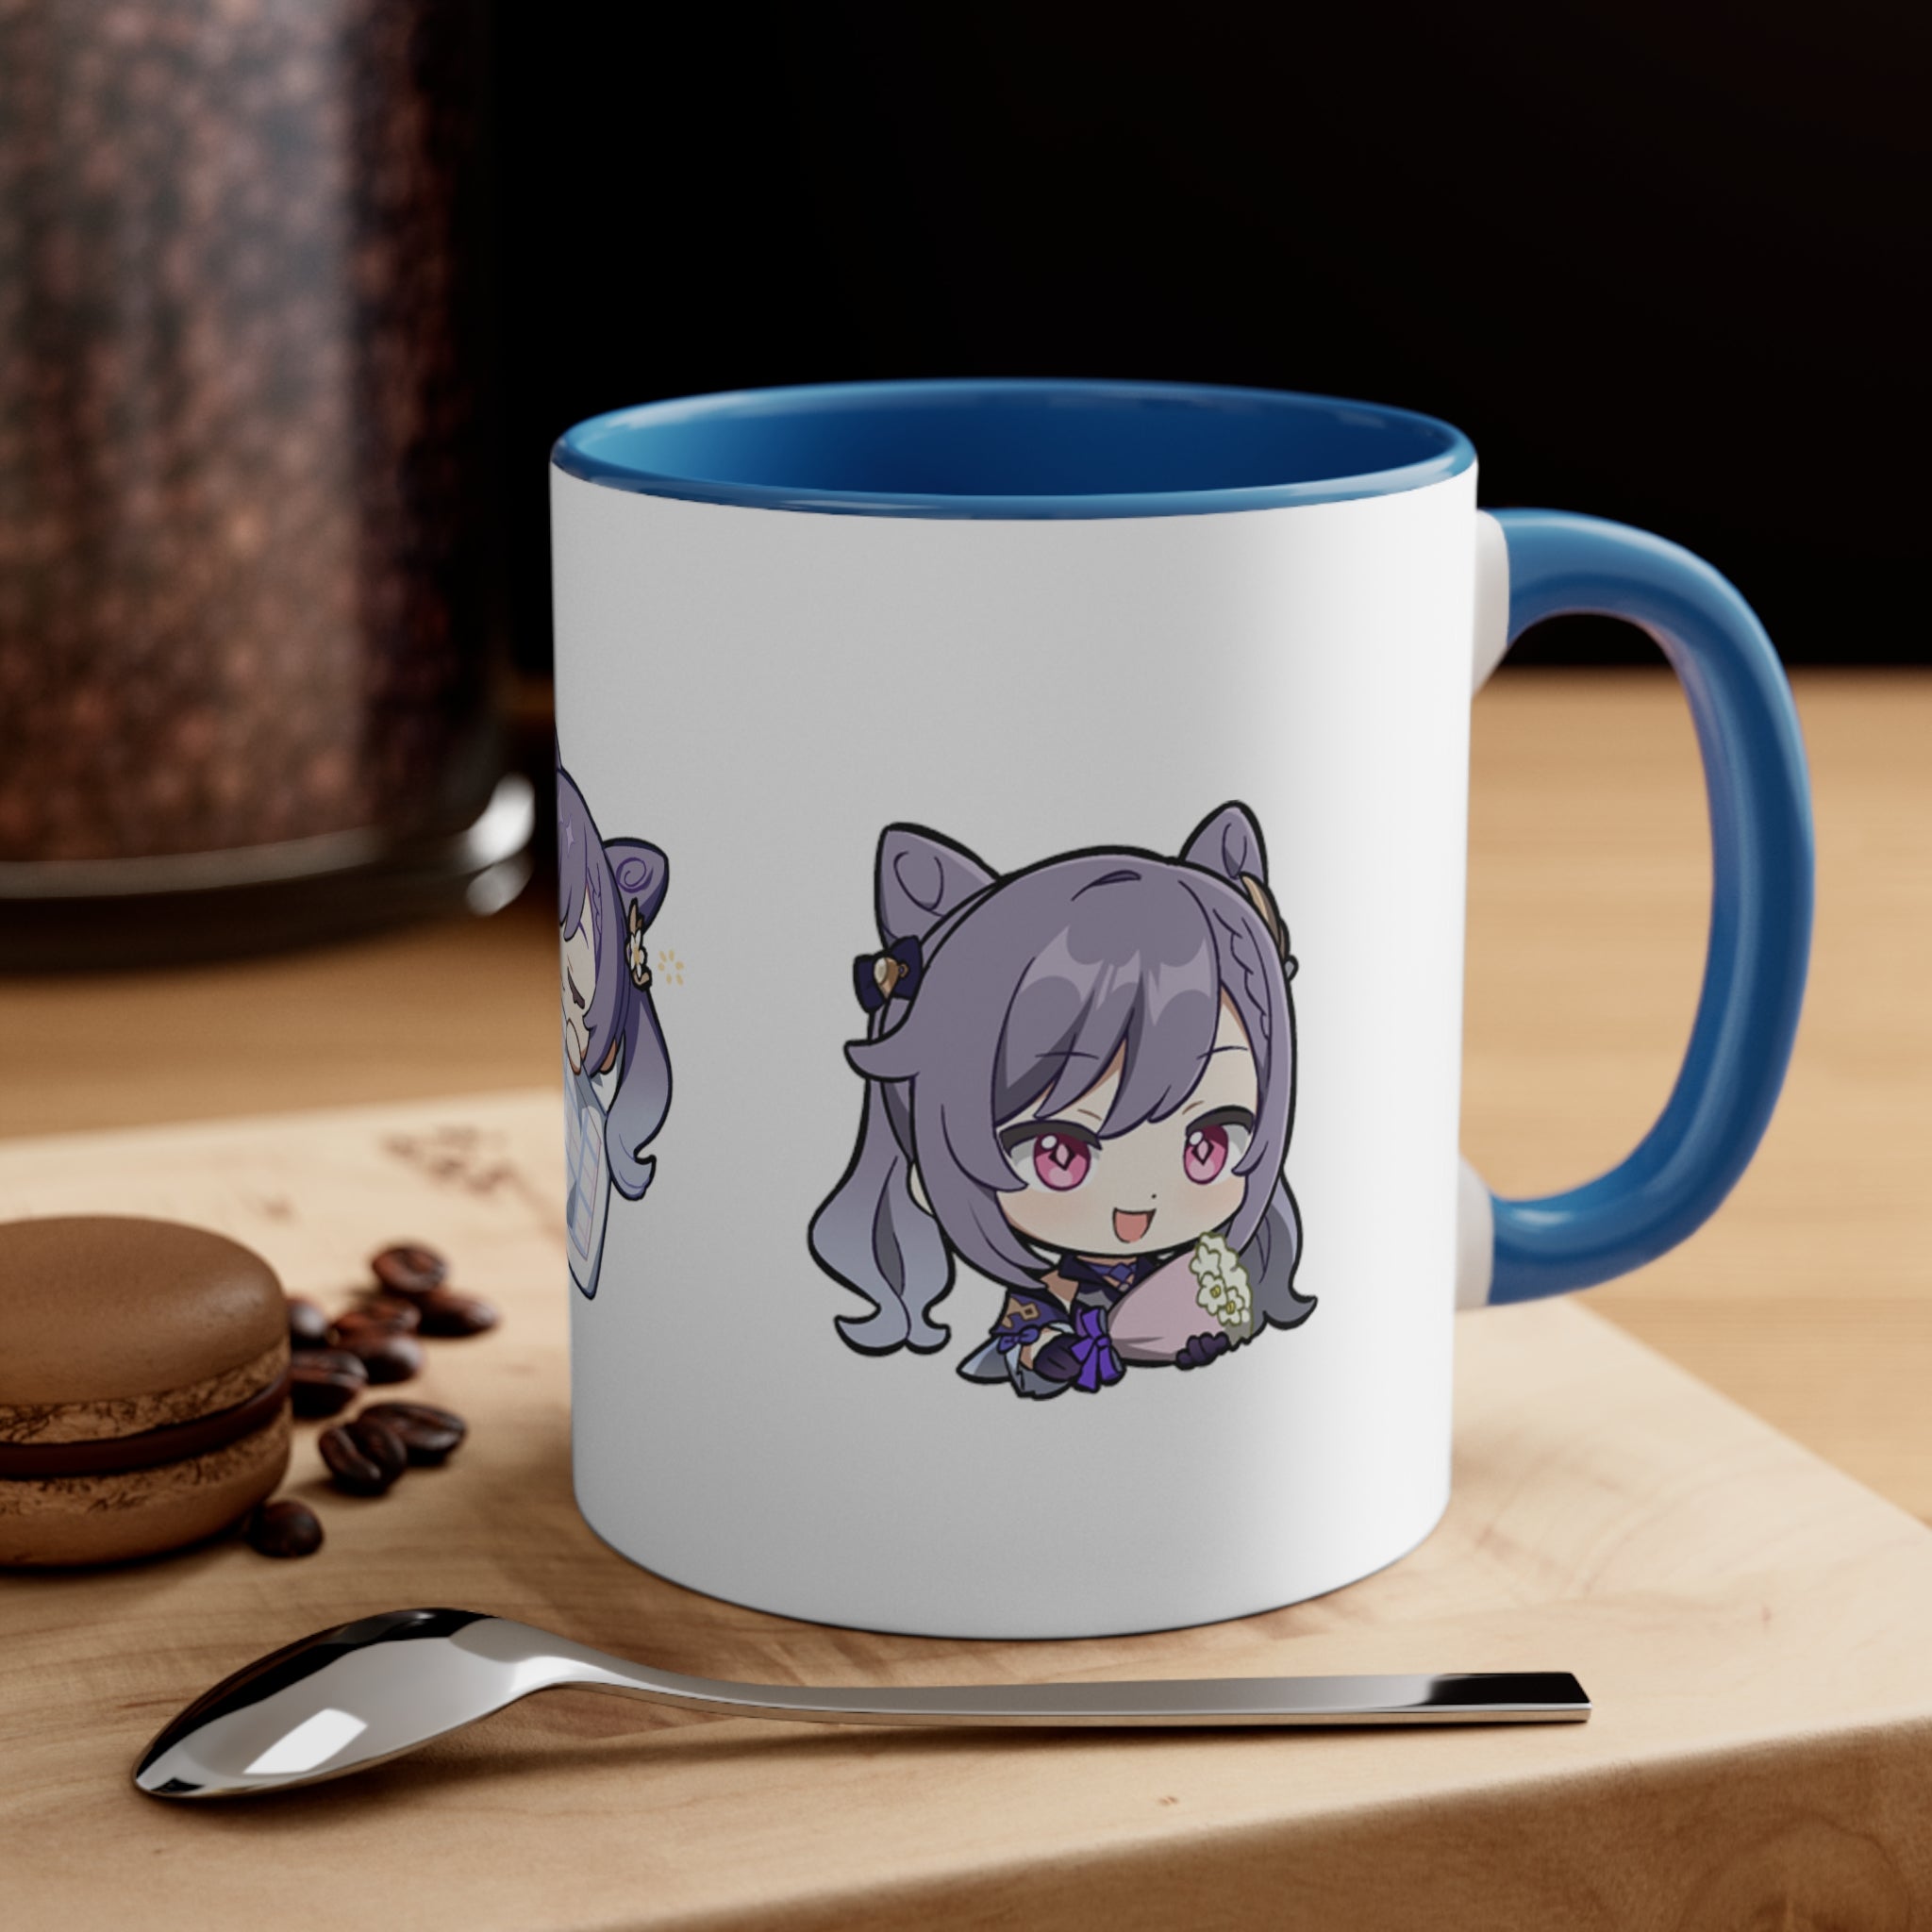 Keqing Genshin Impact Accent Coffee Mug, 11oz Cups Mugs Cup Gift For Gamer Gifts Game Anime Fanart Fan Birthday Valentine's Christmas